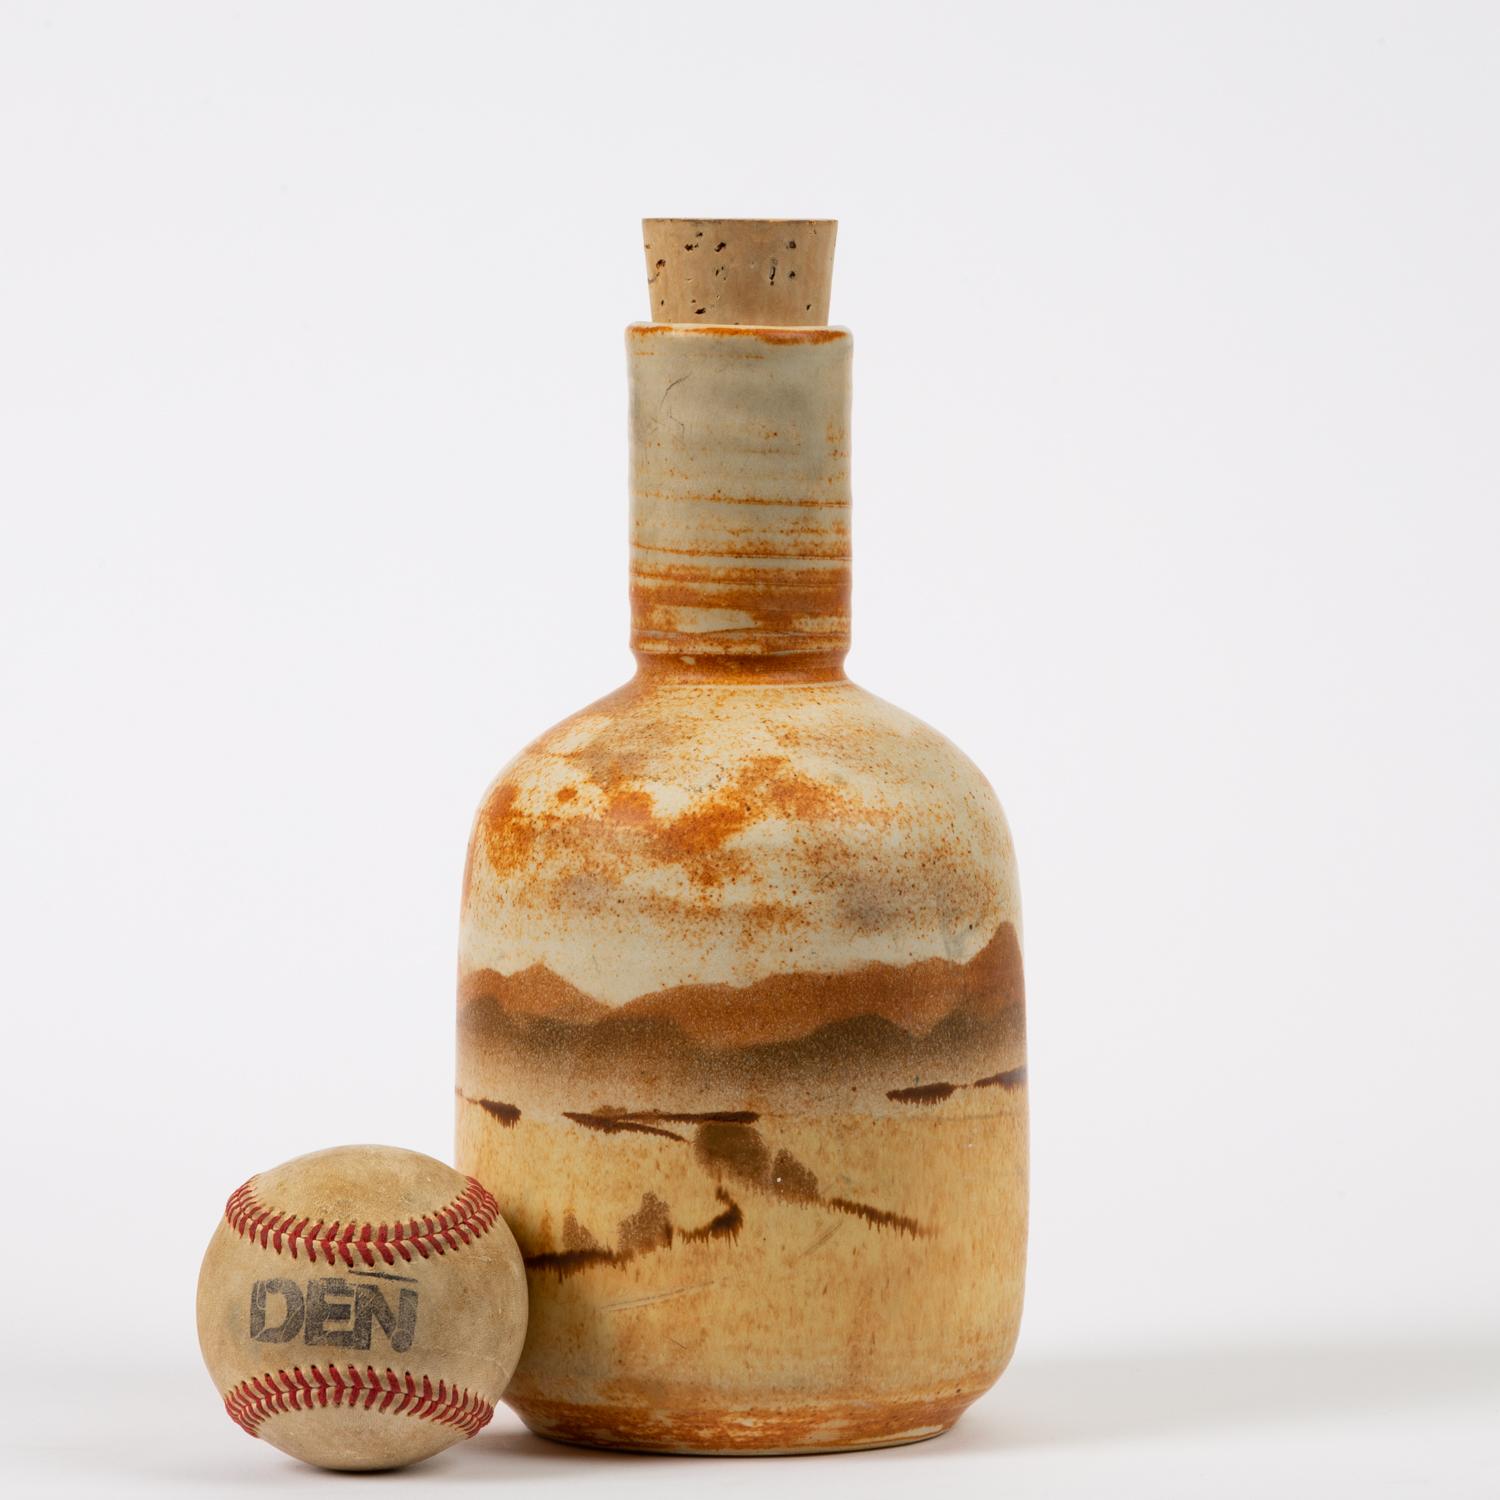 A studio pottery ceramic bottle with a cork stopper. The wheel thrown piece has a wide body with sloping shoulders, tapering towards the foot, and is notched where the neck joins the body. The vessel features an earth-toned color palette in tan,